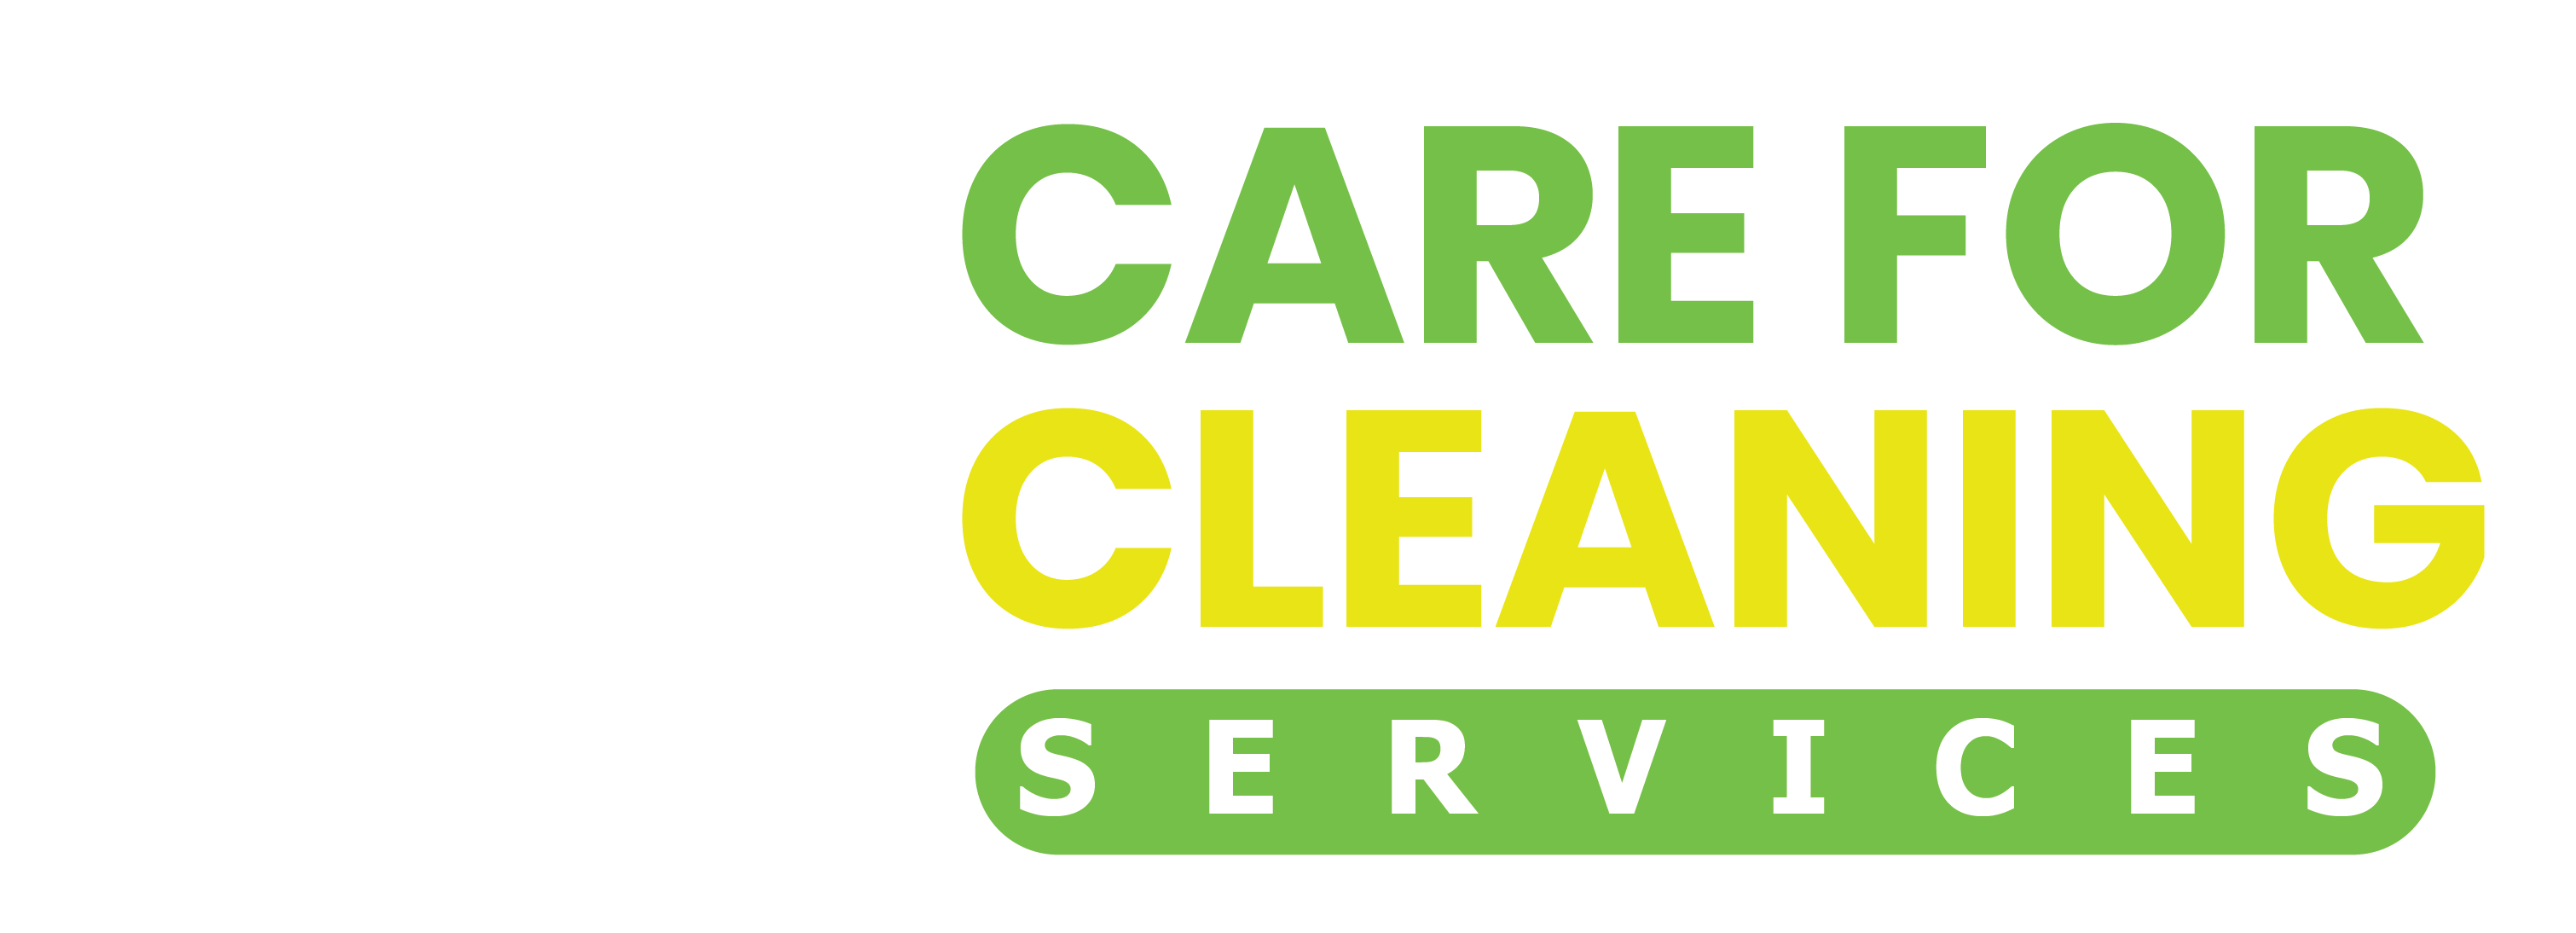 Care For Cleaning Services